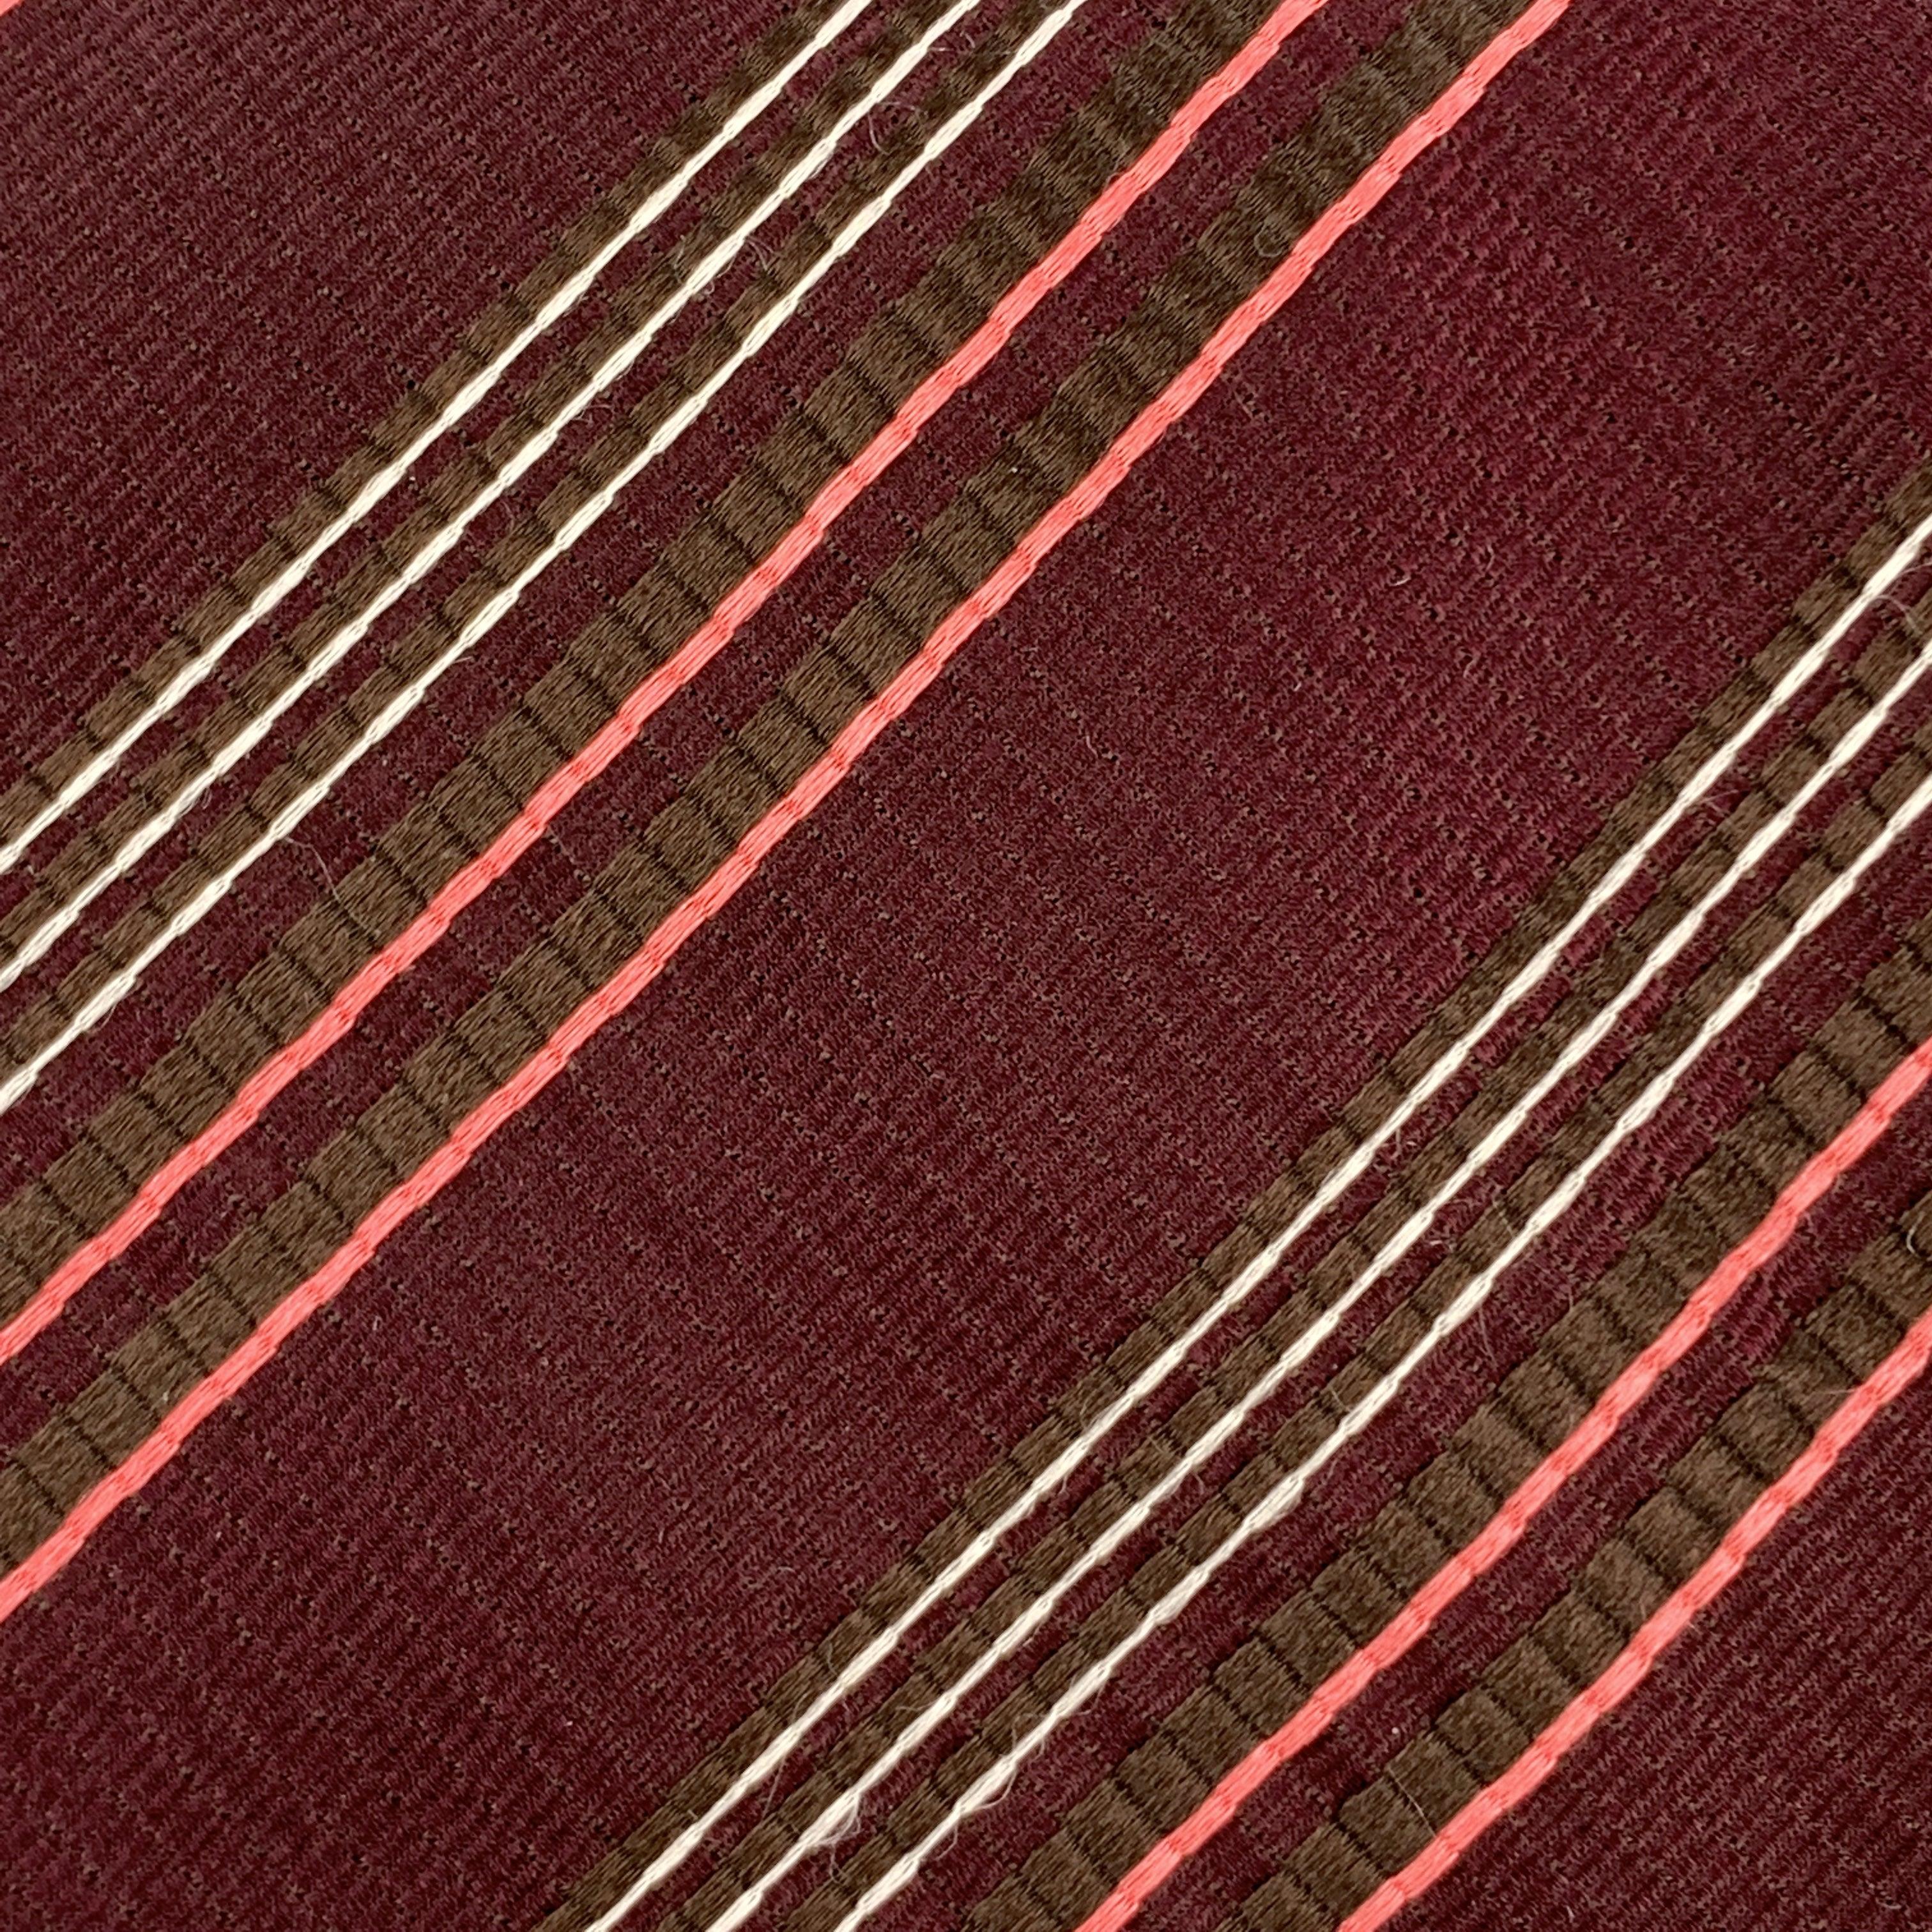 GIORGIO ARMANI
necktie comes in burgundy textured silk with all over diagonal striped print. Made in Italy. Excellent Pre-Owned Condition.Width: 3.75 inches 
  
  
 
Reference: 81141
Category: Tie
More Details
    
Brand:  GIORGIO ARMANI
Color: 